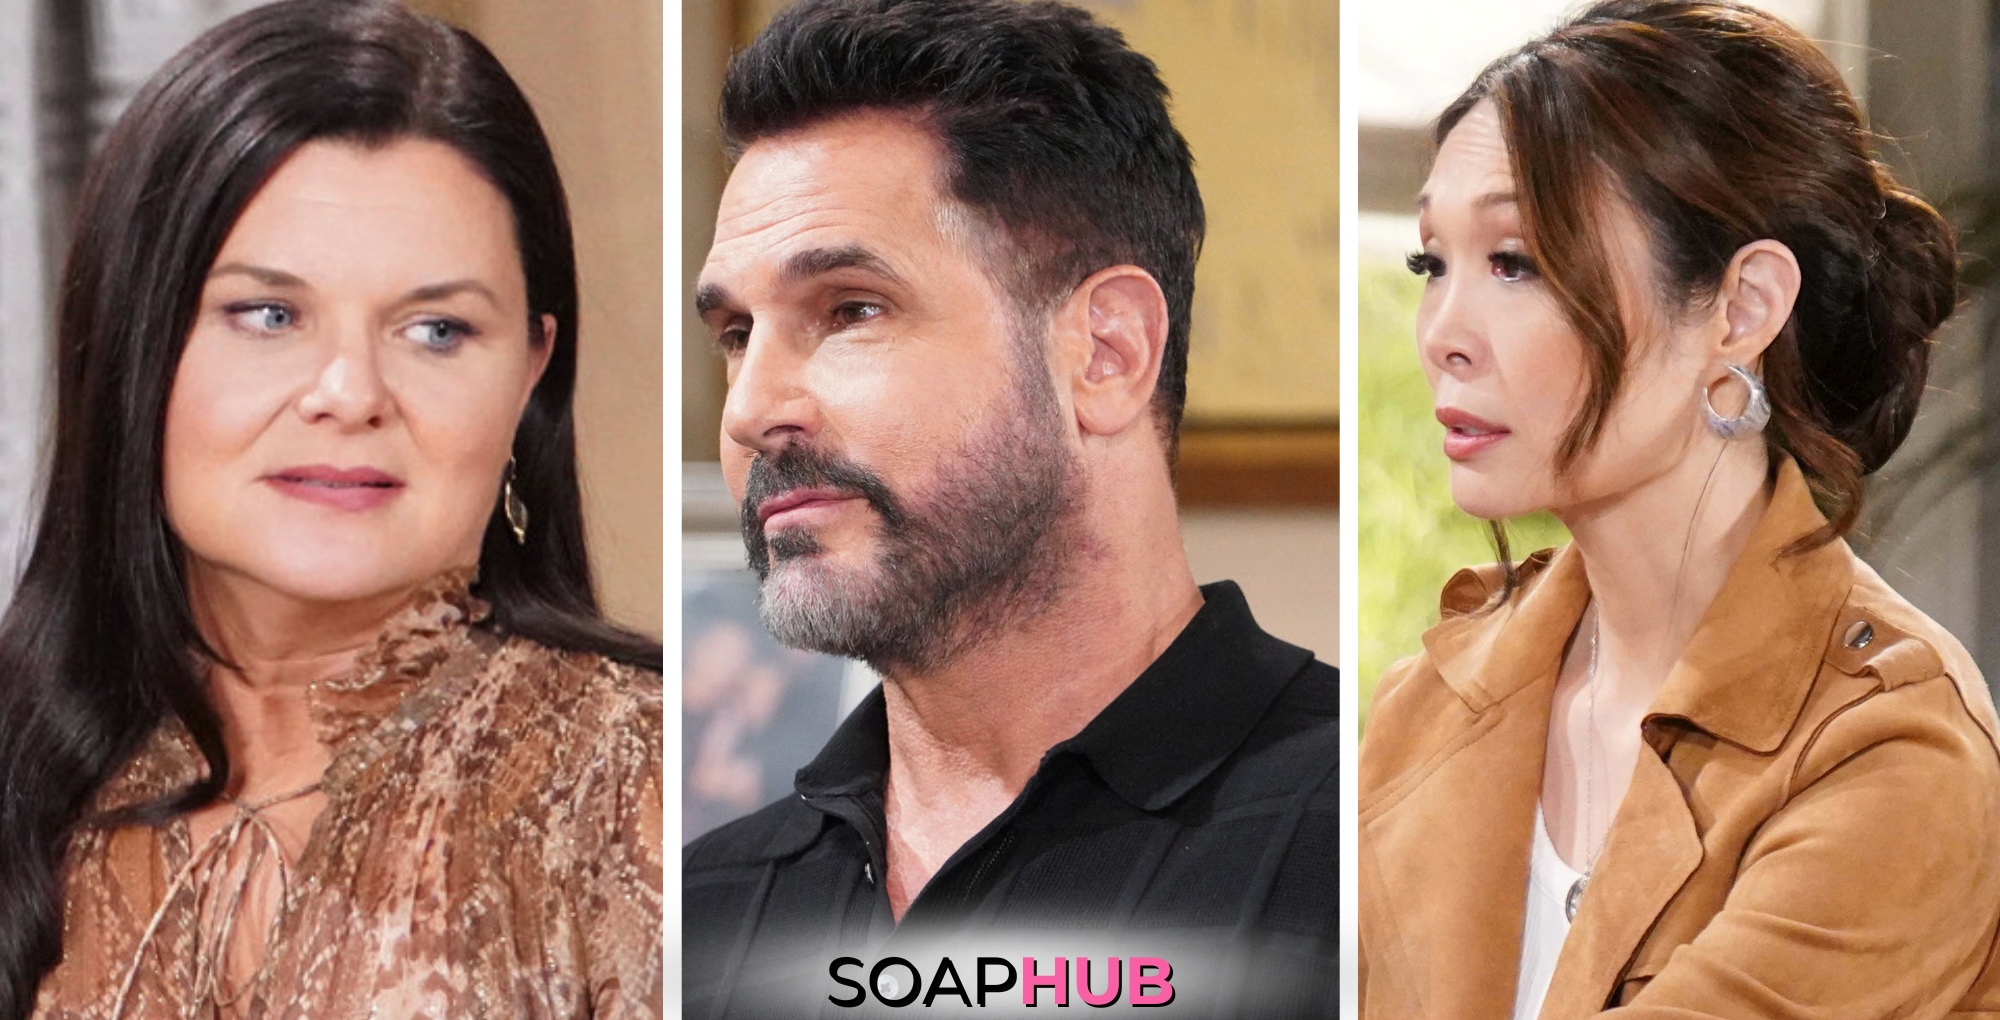 Bold and the Beautiful Spoilers for the Week of June 17 - 21 Feature Katie, Bill and Poppy with the Soap Hub Logo Across the Bottom.